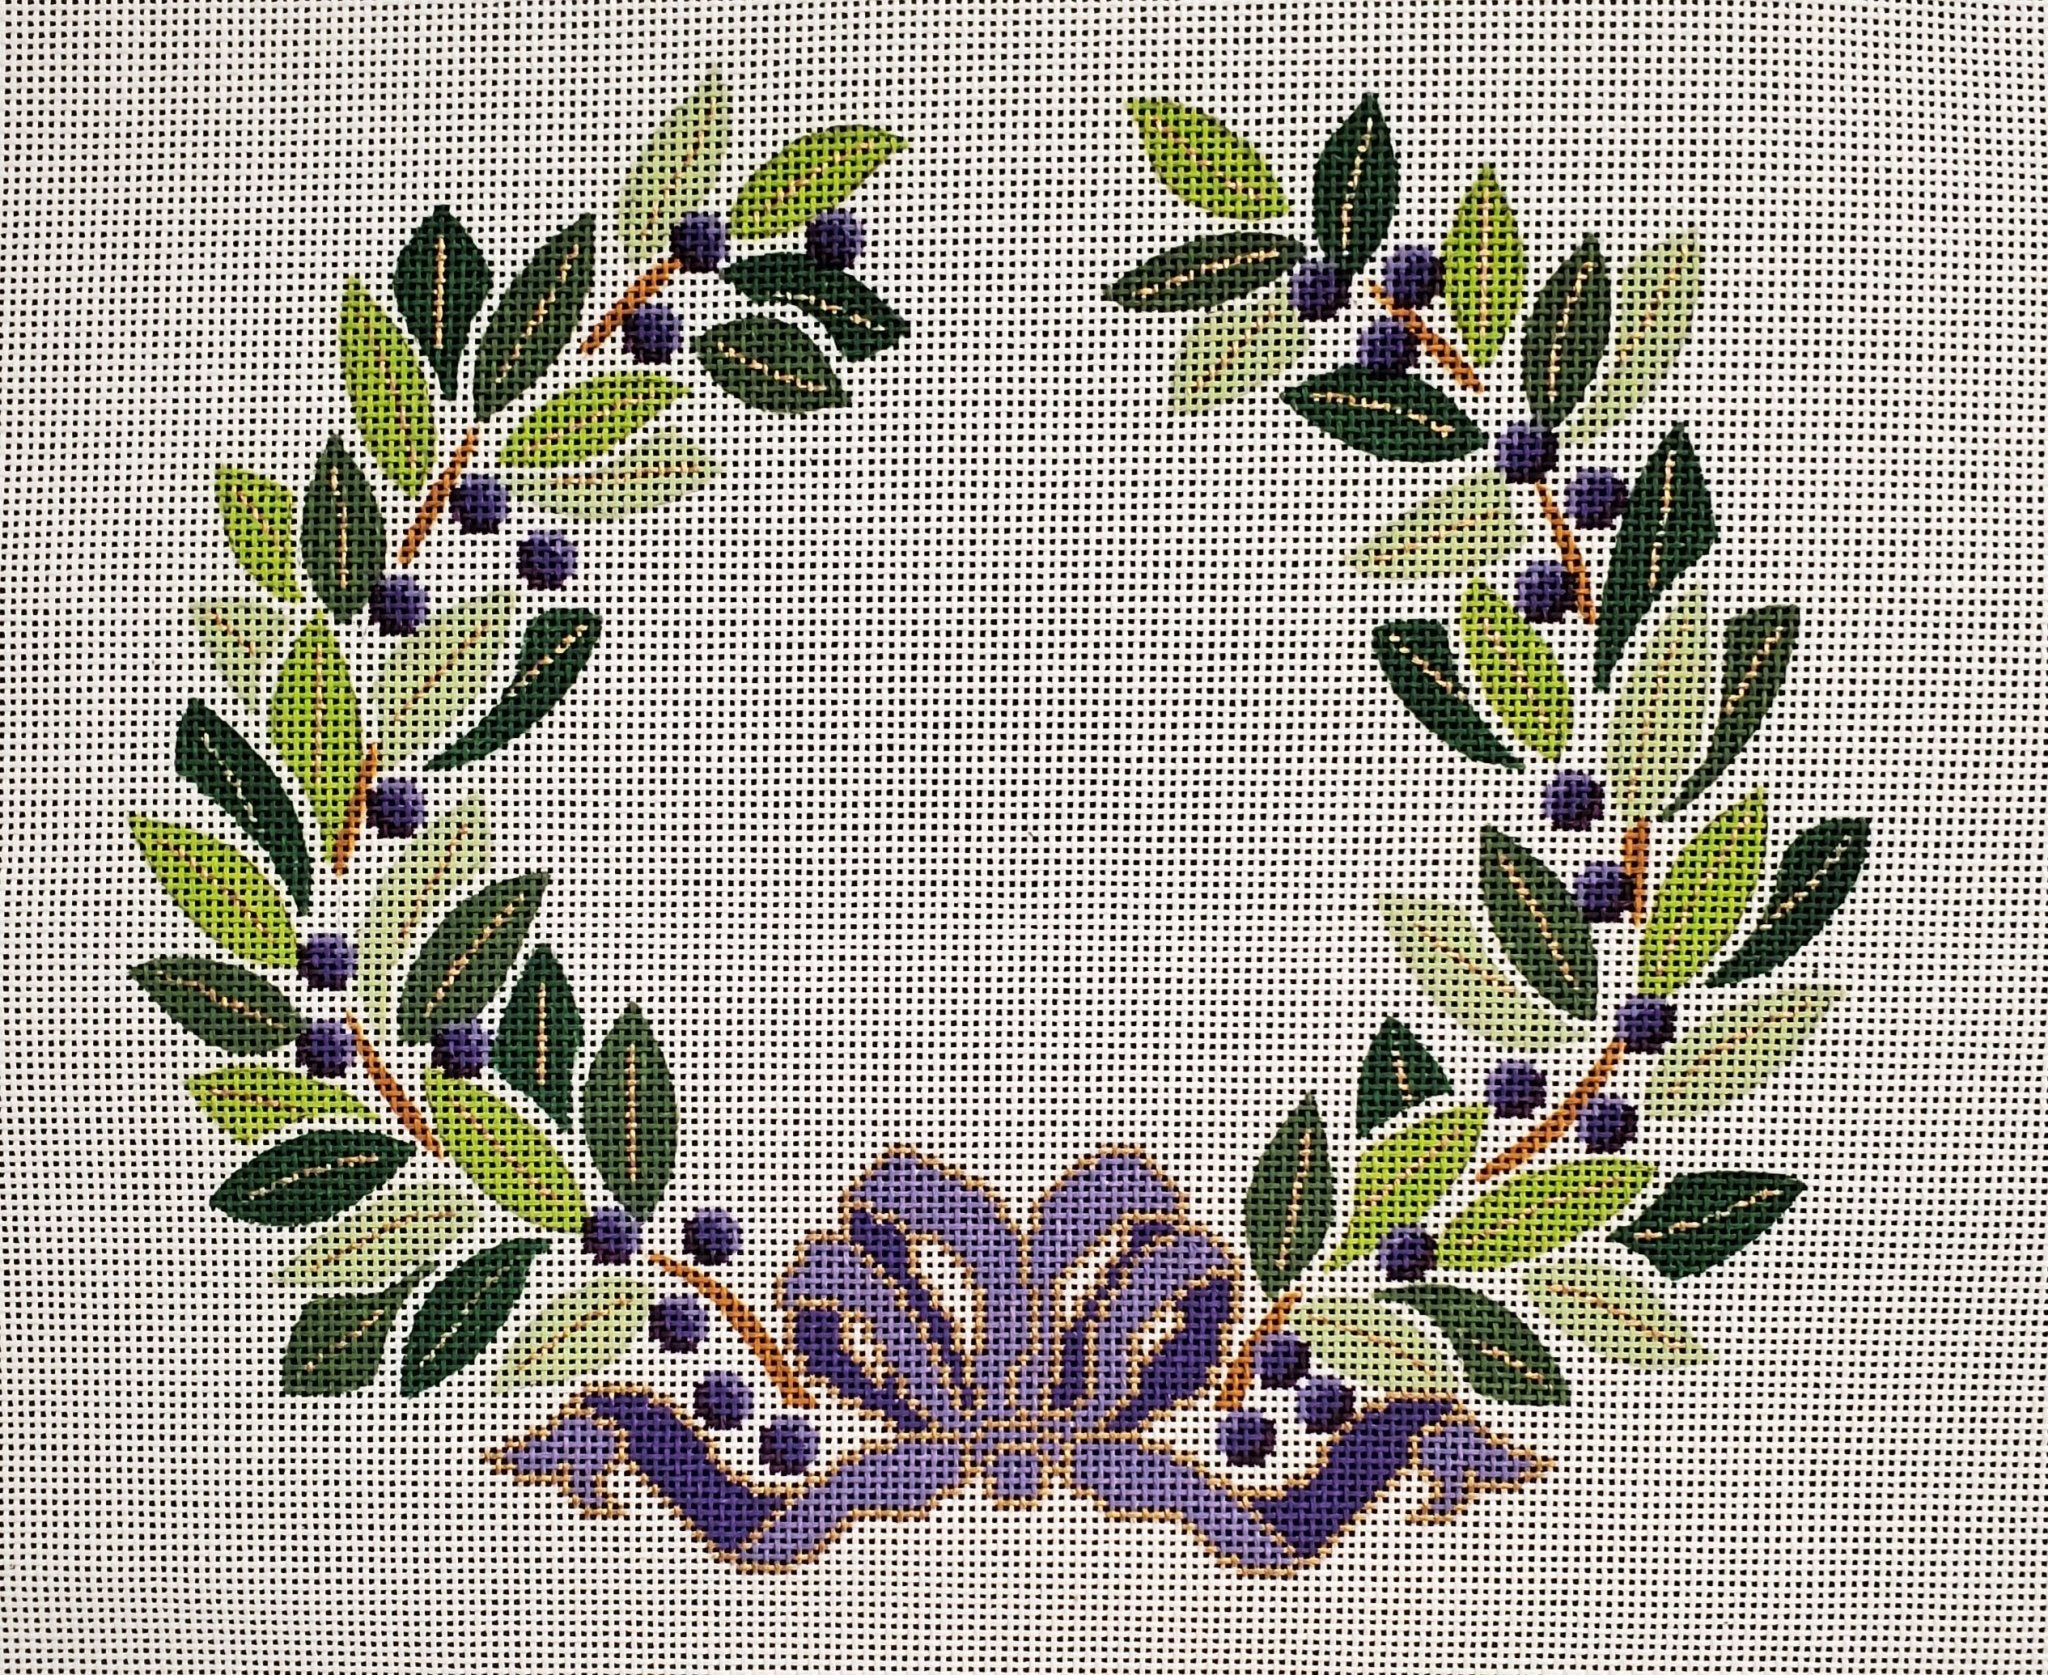 Olive Wreath Lavender - The Flying Needles